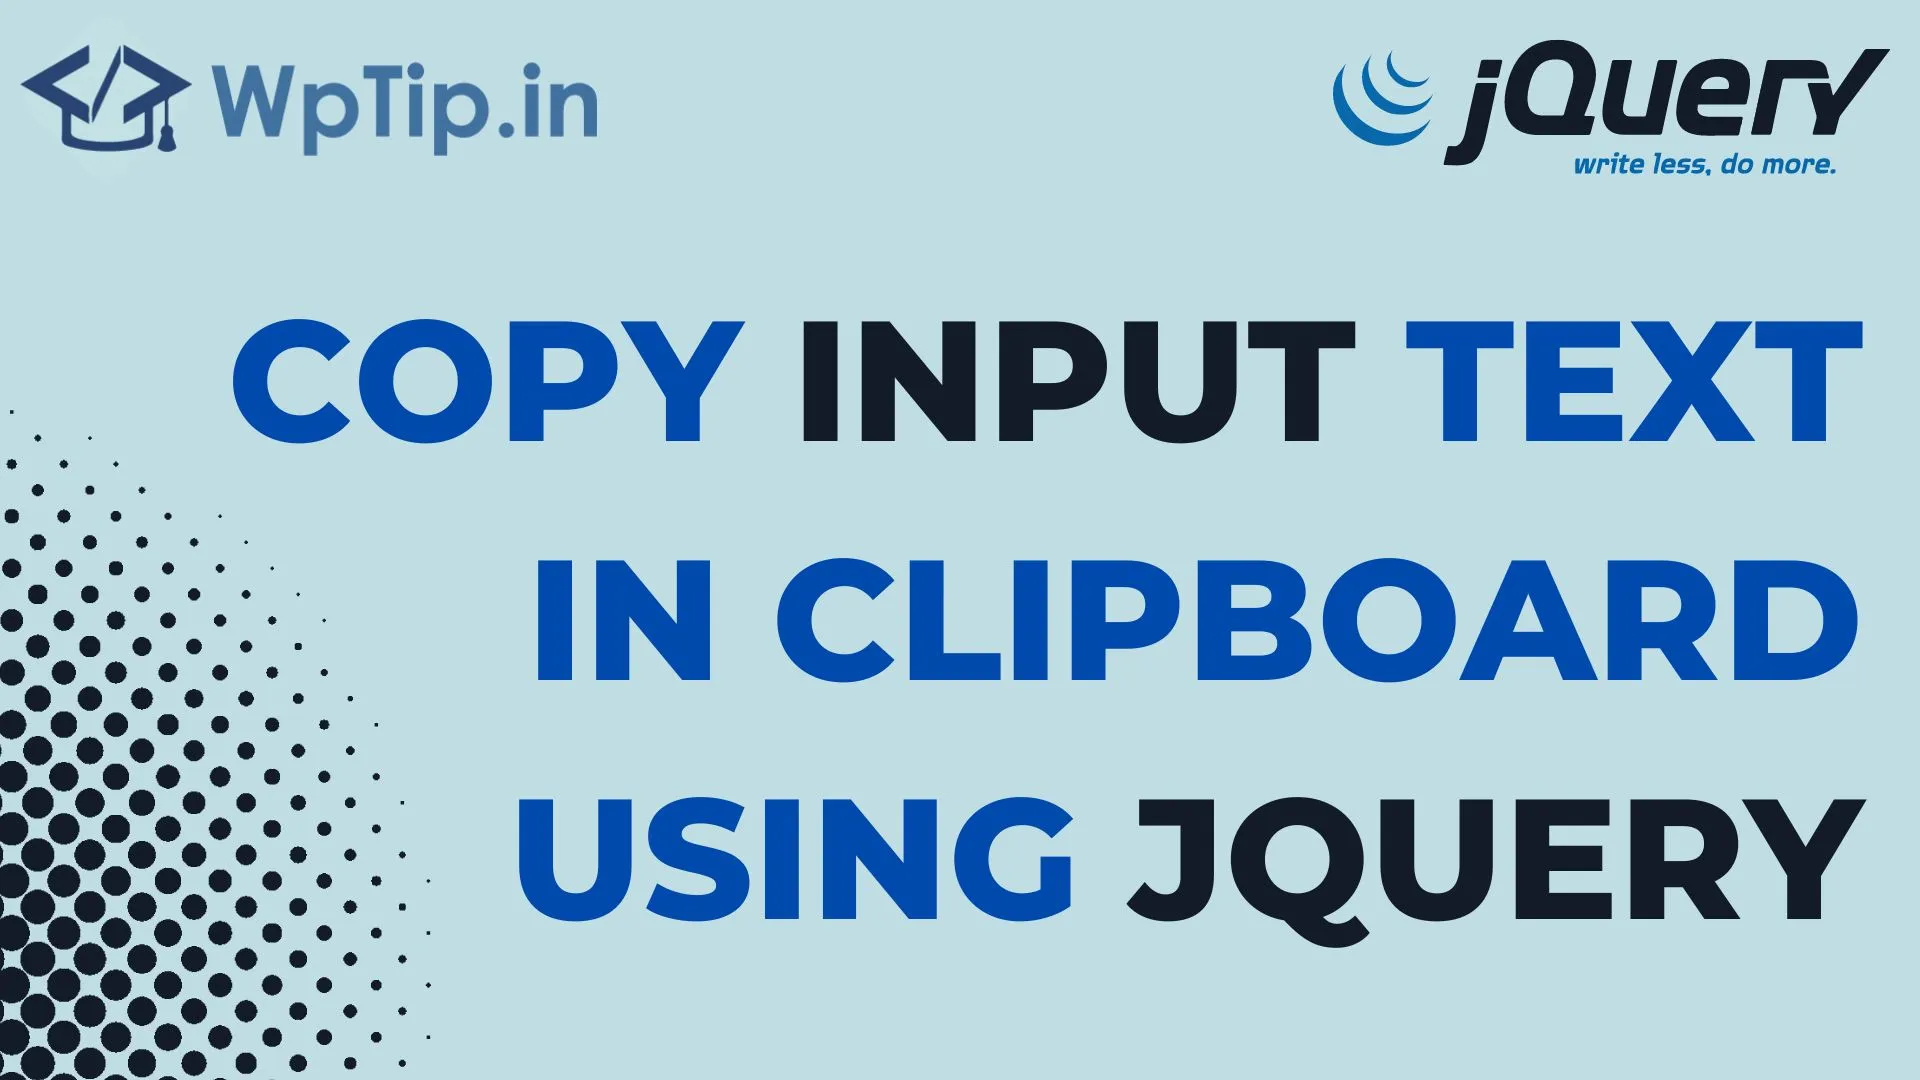 You are currently viewing Copy input text in clipboard using jQuery